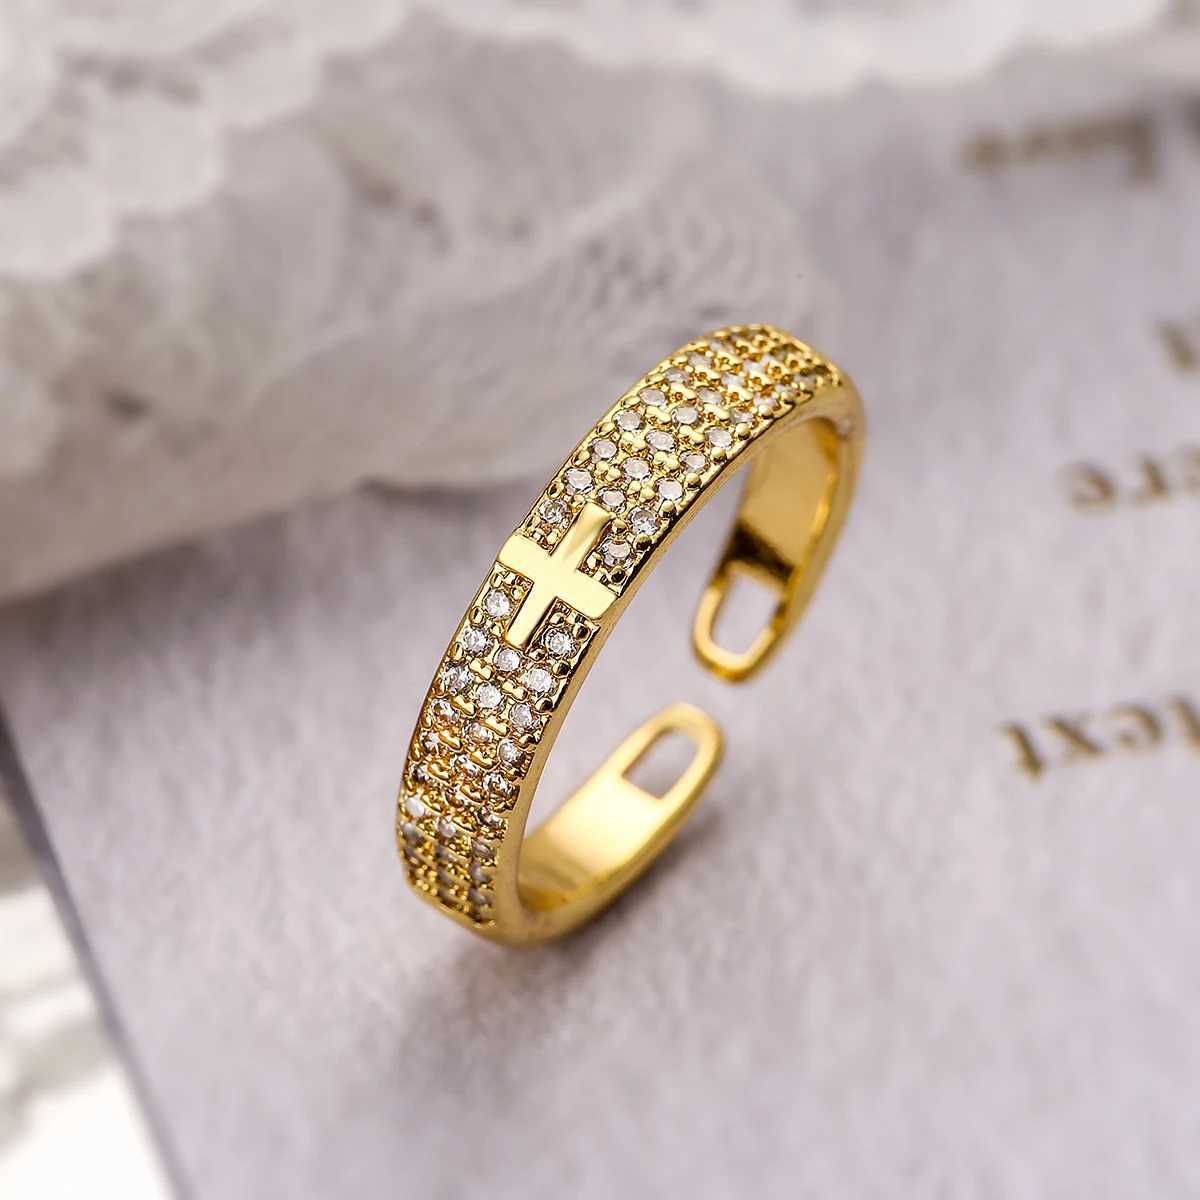 Band Rings Womens Classic Cross Open Ring Cubic Zirconia Fingerband Modern Womens Dating Party Jewelry Q240427